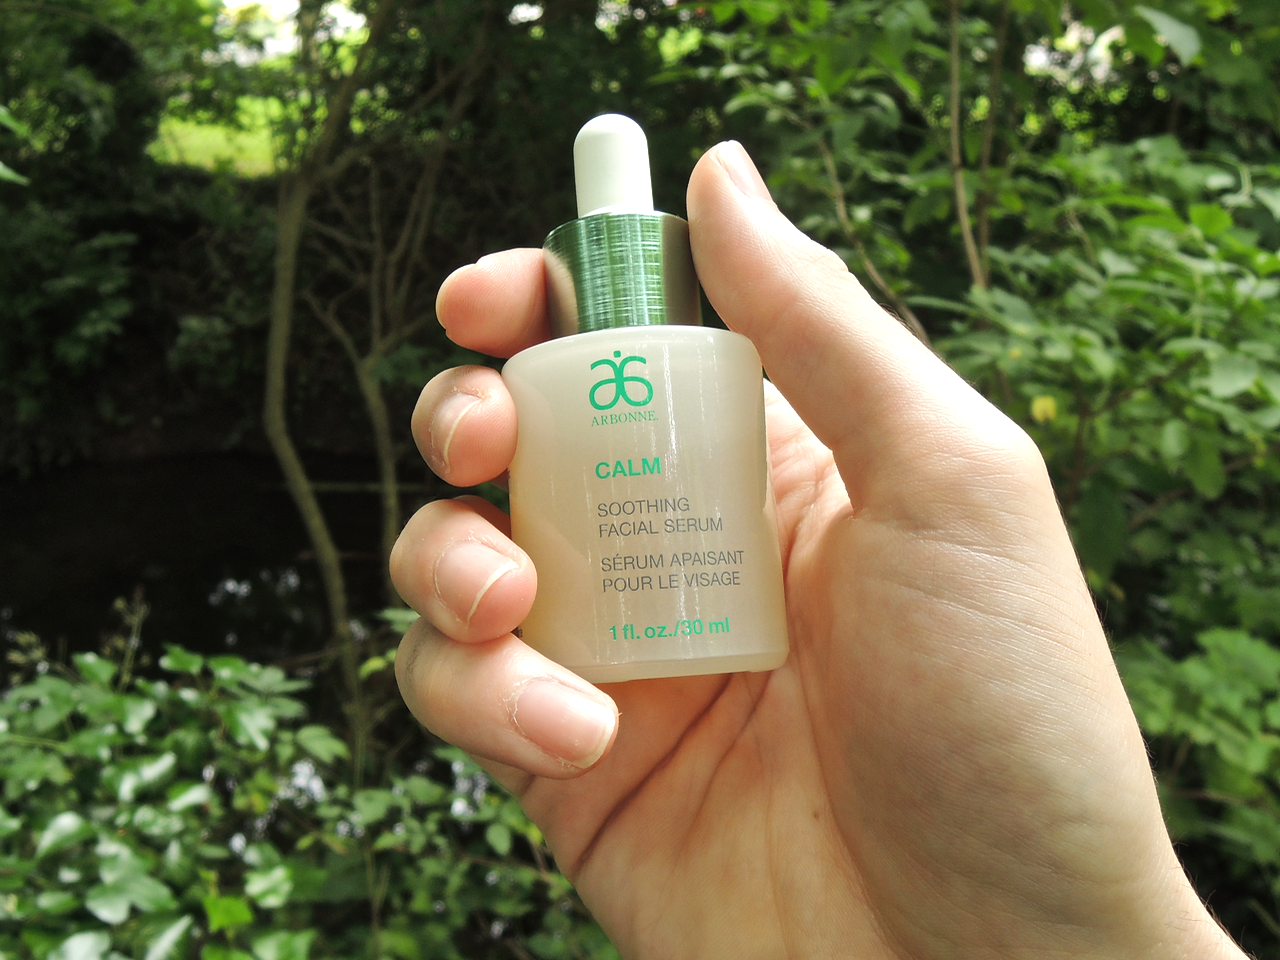 Arbonne Calm Soothing Facial Serum Review.